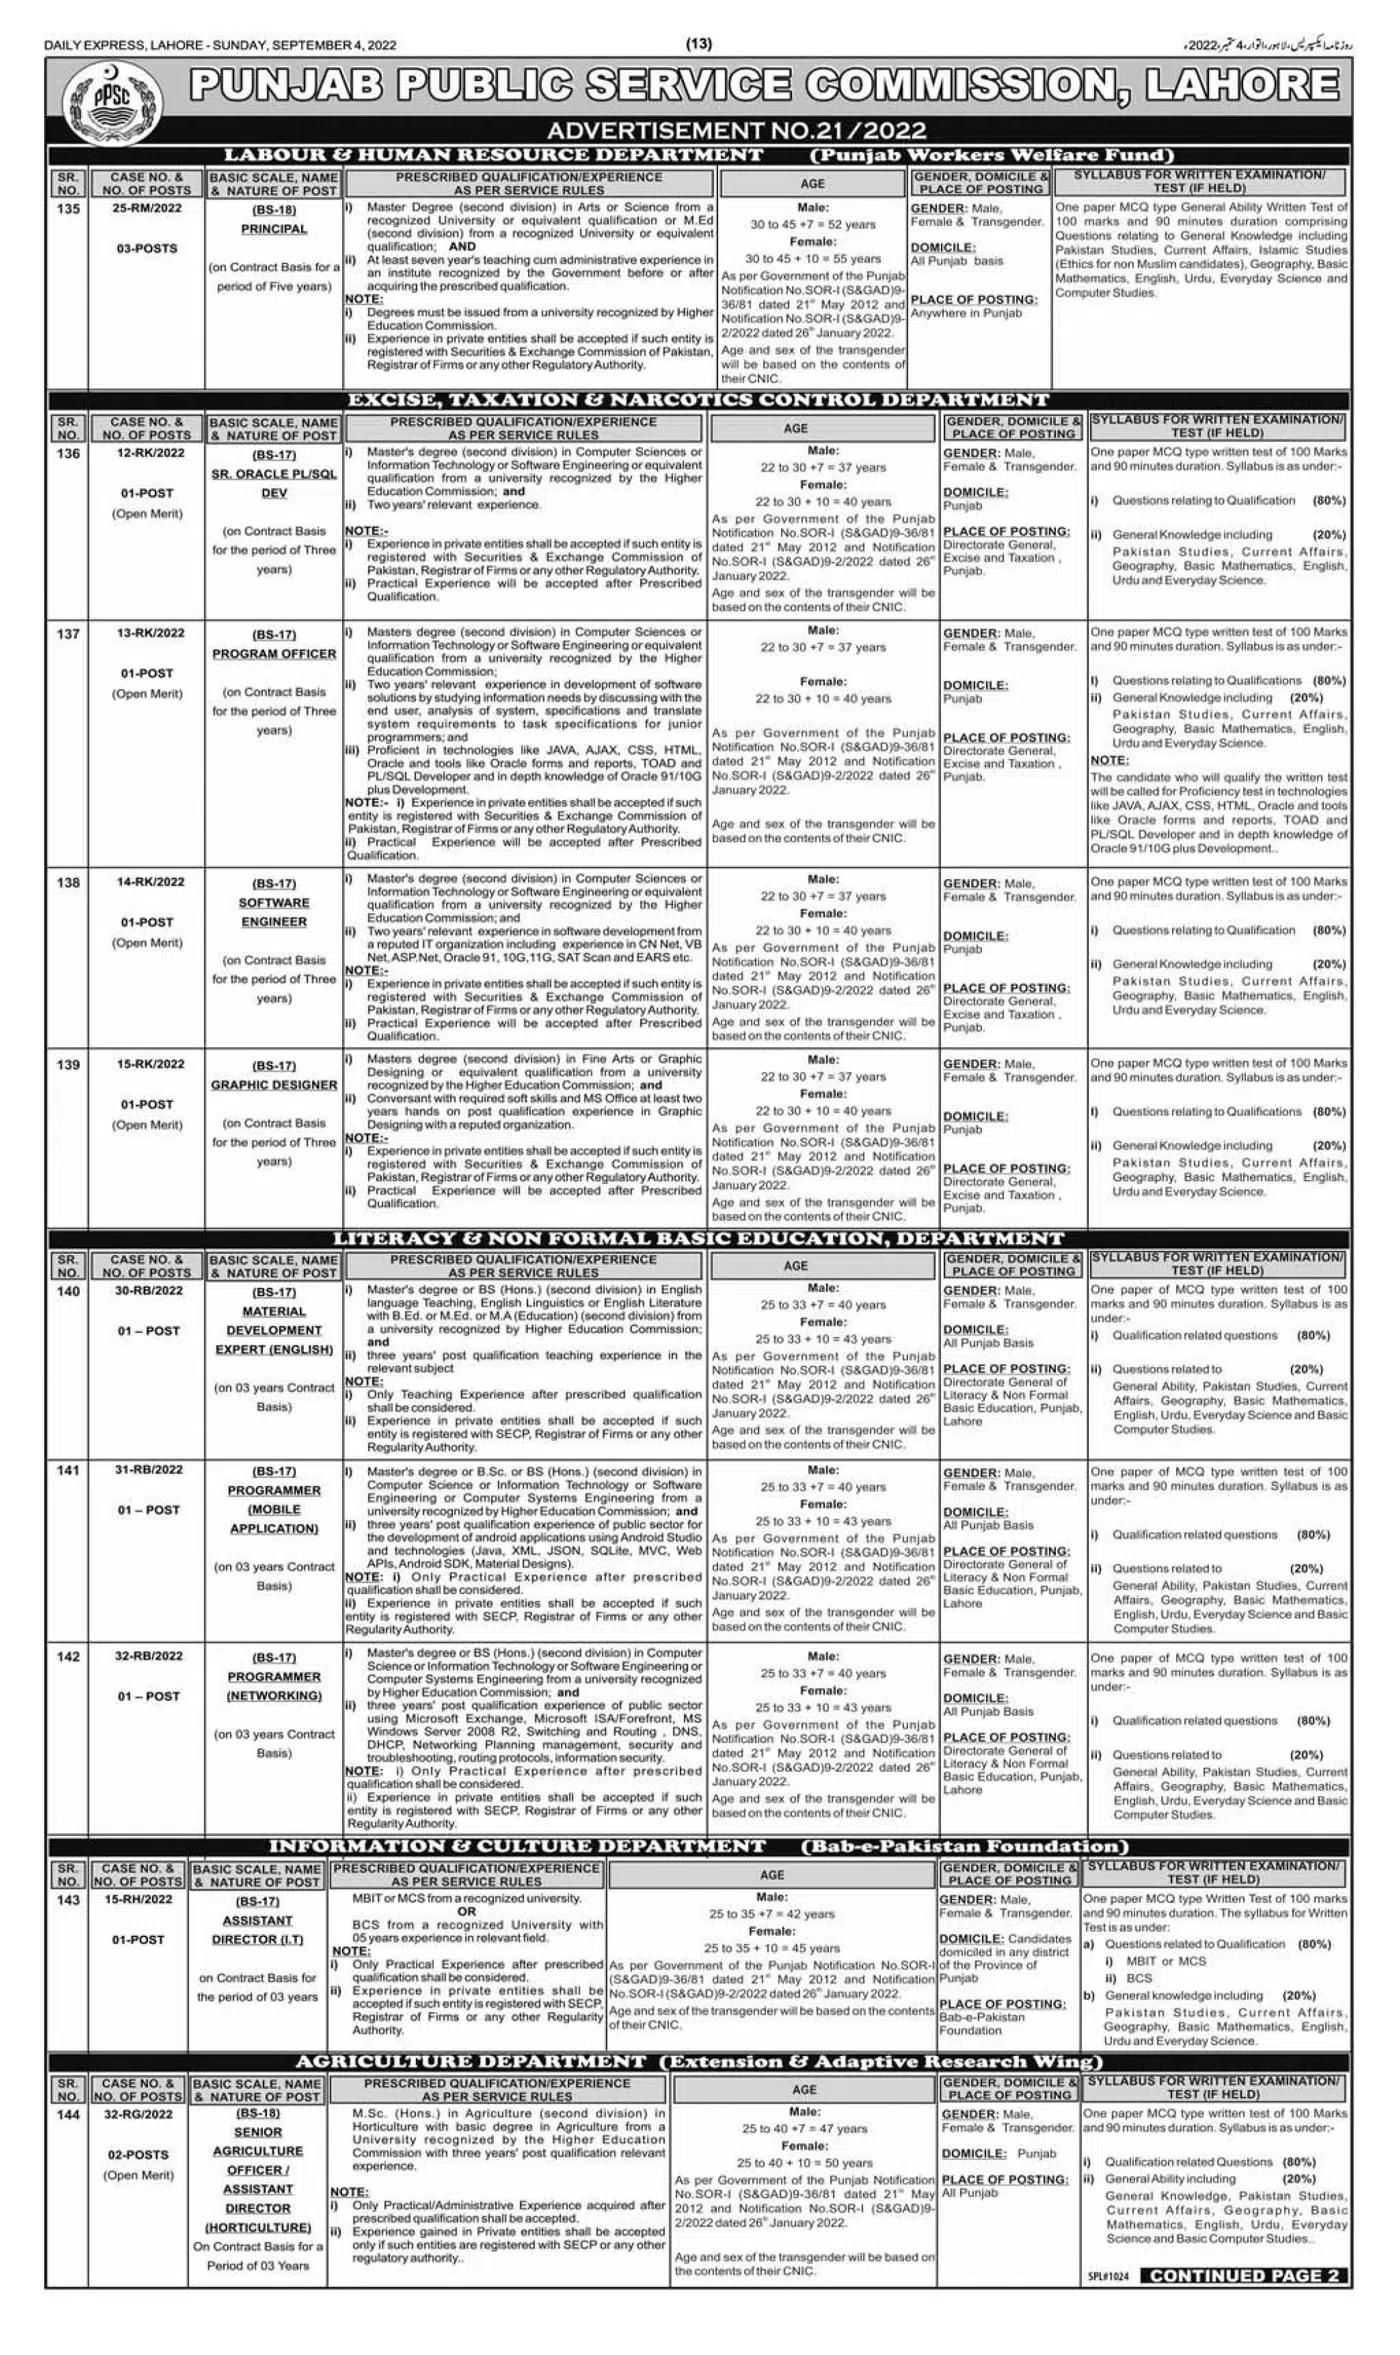 PPSC Advertisement Number 21-2022